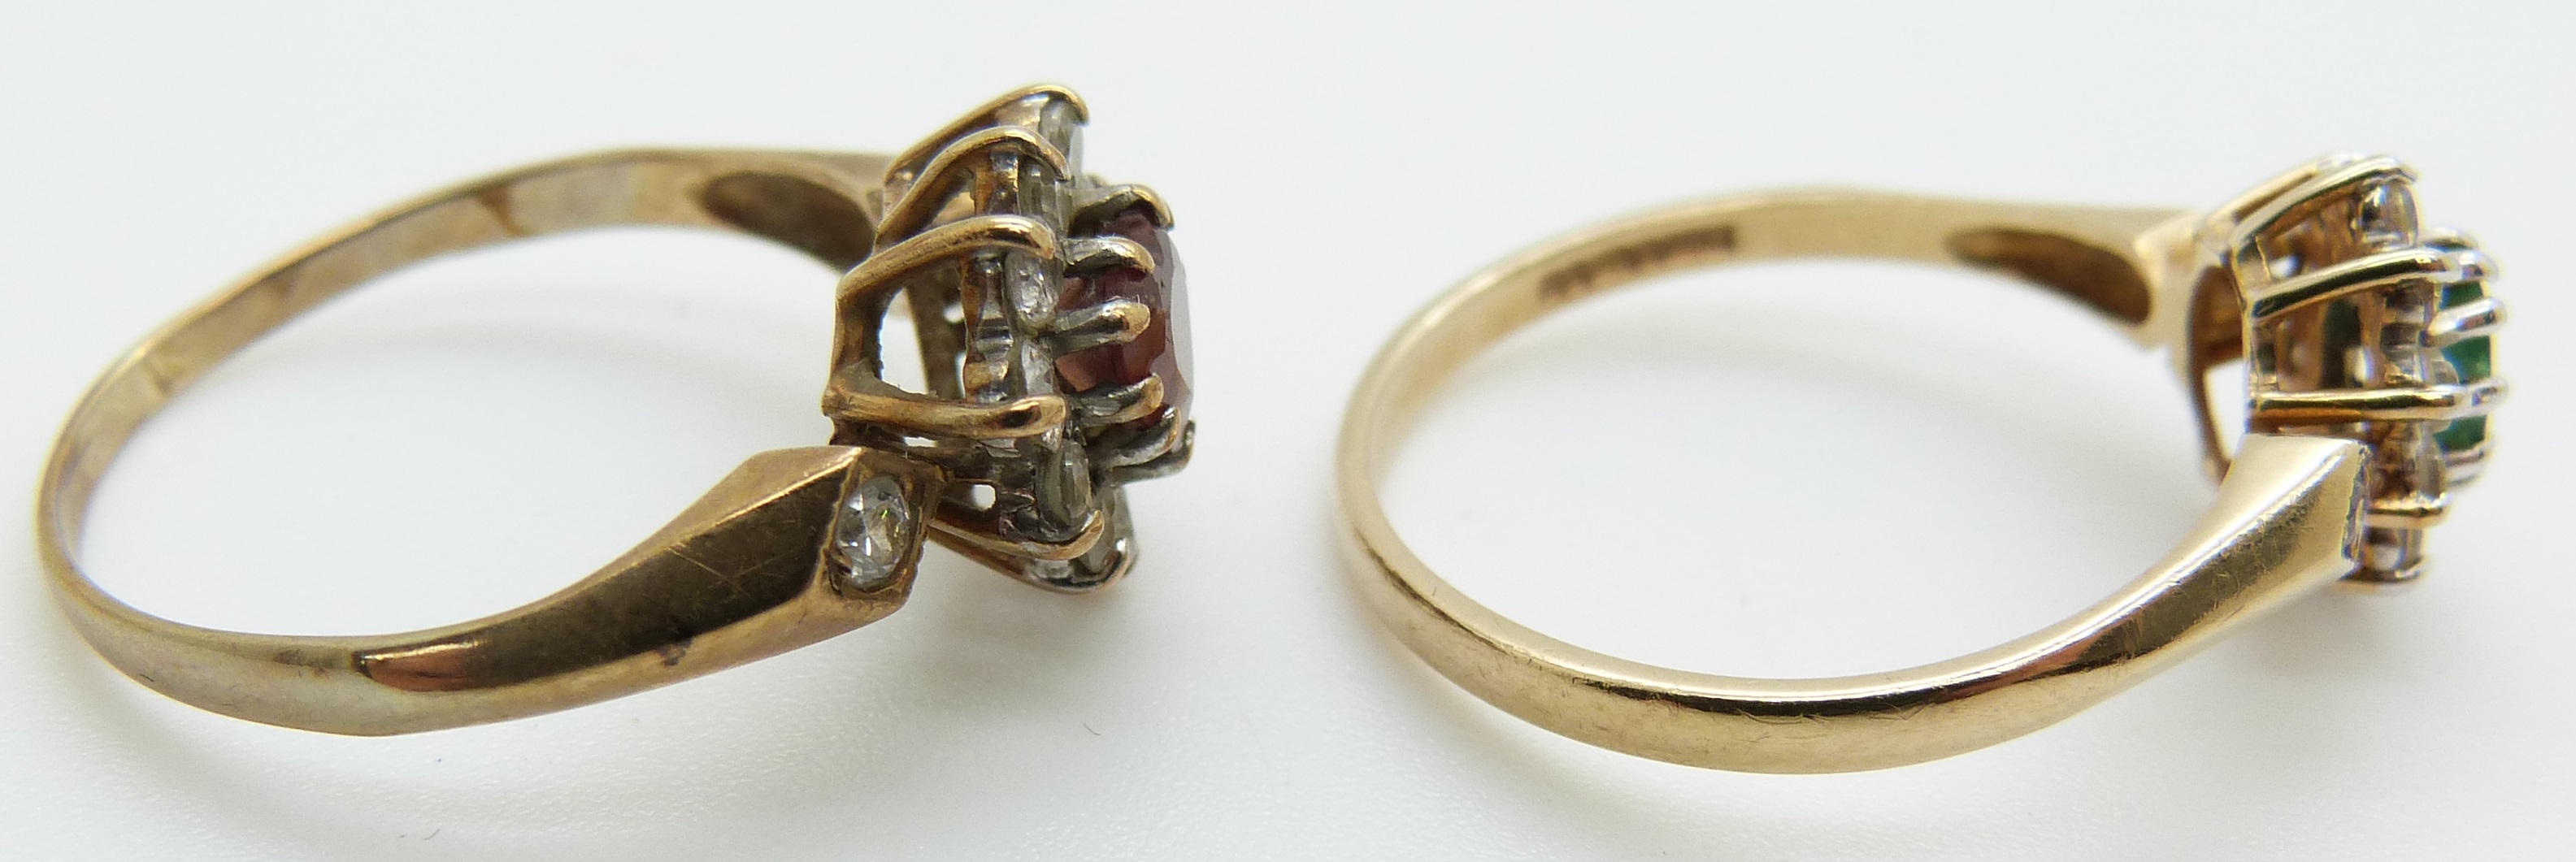 A 9ct gold ring set with a garnet surrounded by cubic zirconia and another 9ct gold ring set with an - Image 3 of 3